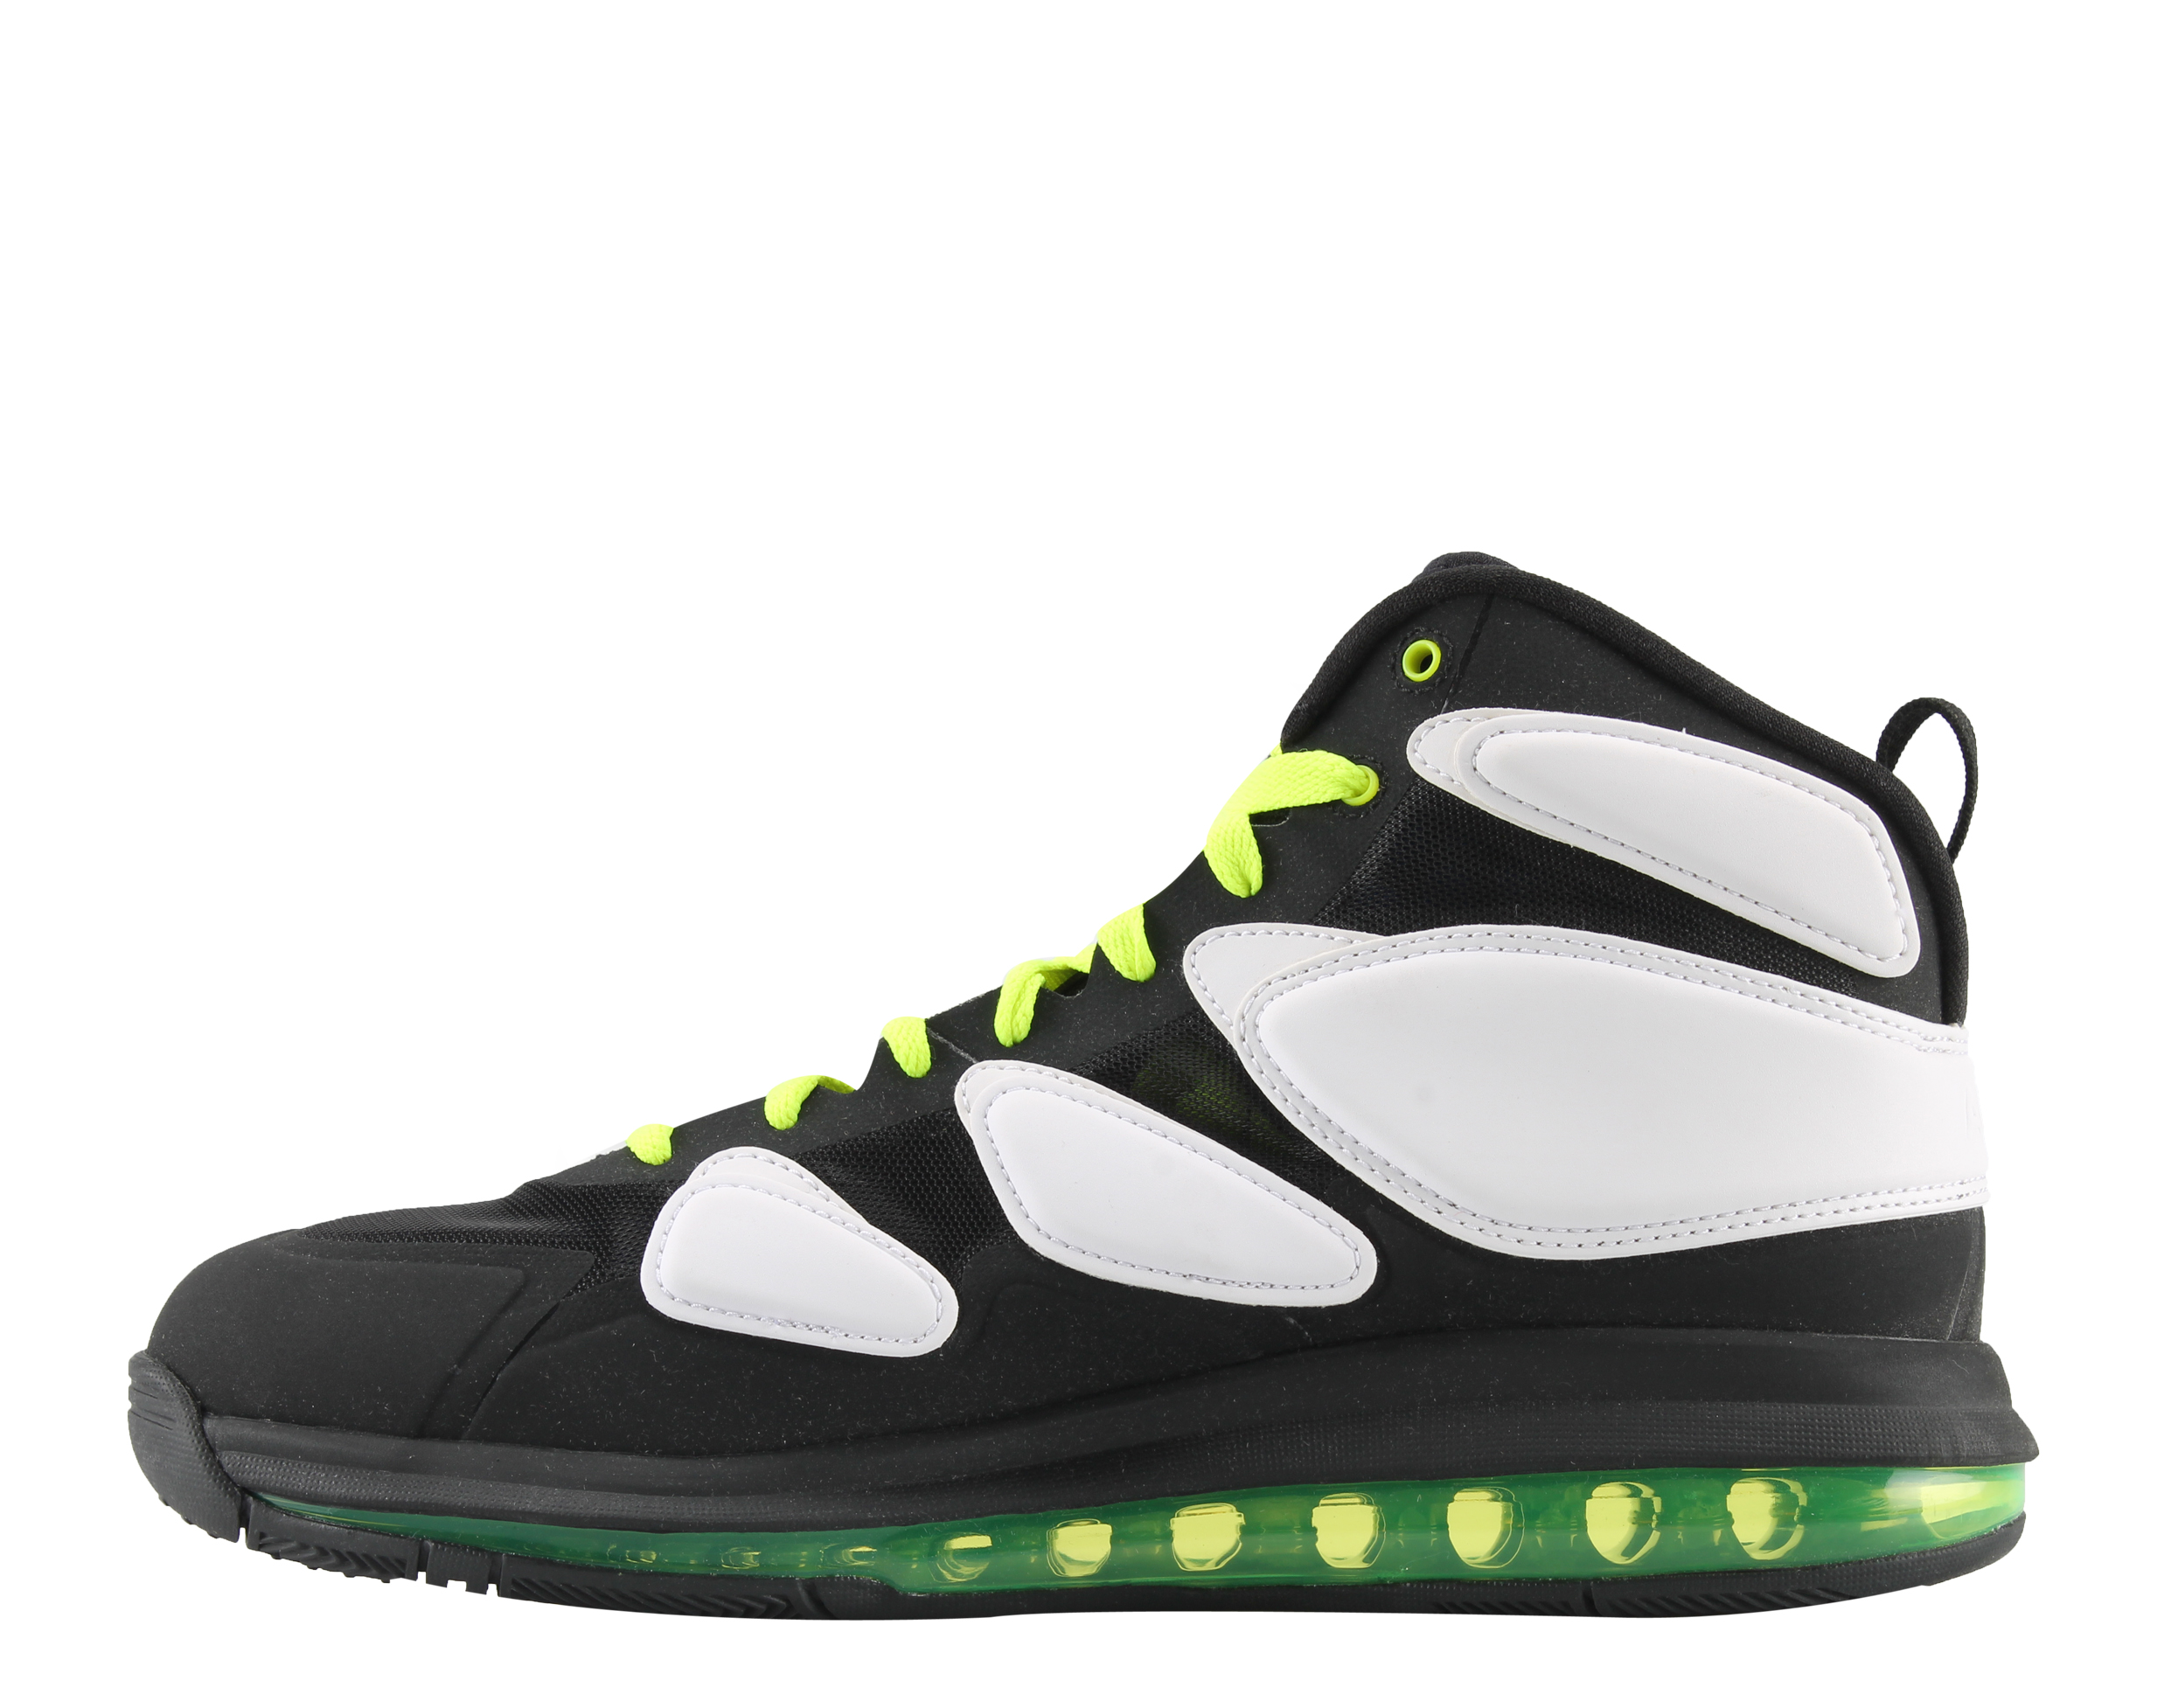 Nike Air Max Sq Uptempo Zm Basketball Men's Shoes - image 3 of 6